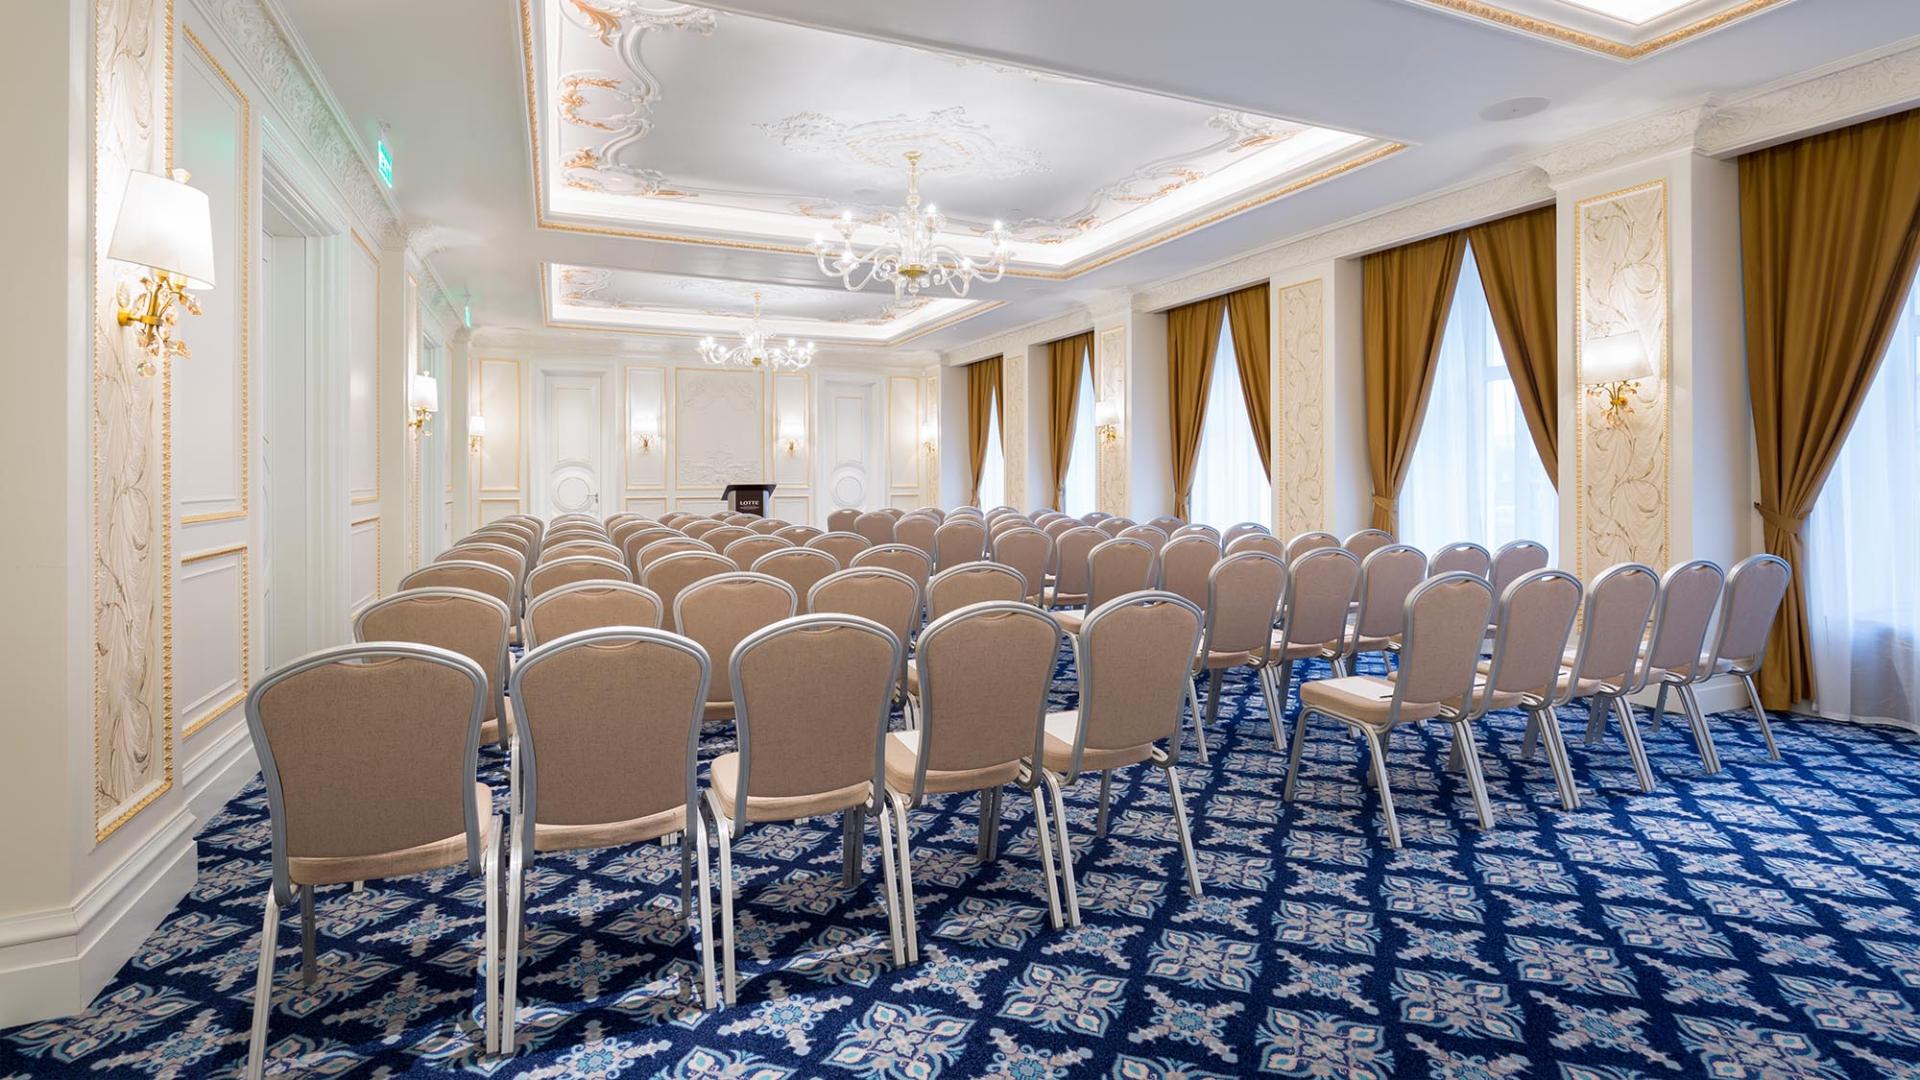 Lotte Hotel St. Petersburg - Banquets & Conventions - Charlotte Hall Banquet Hall